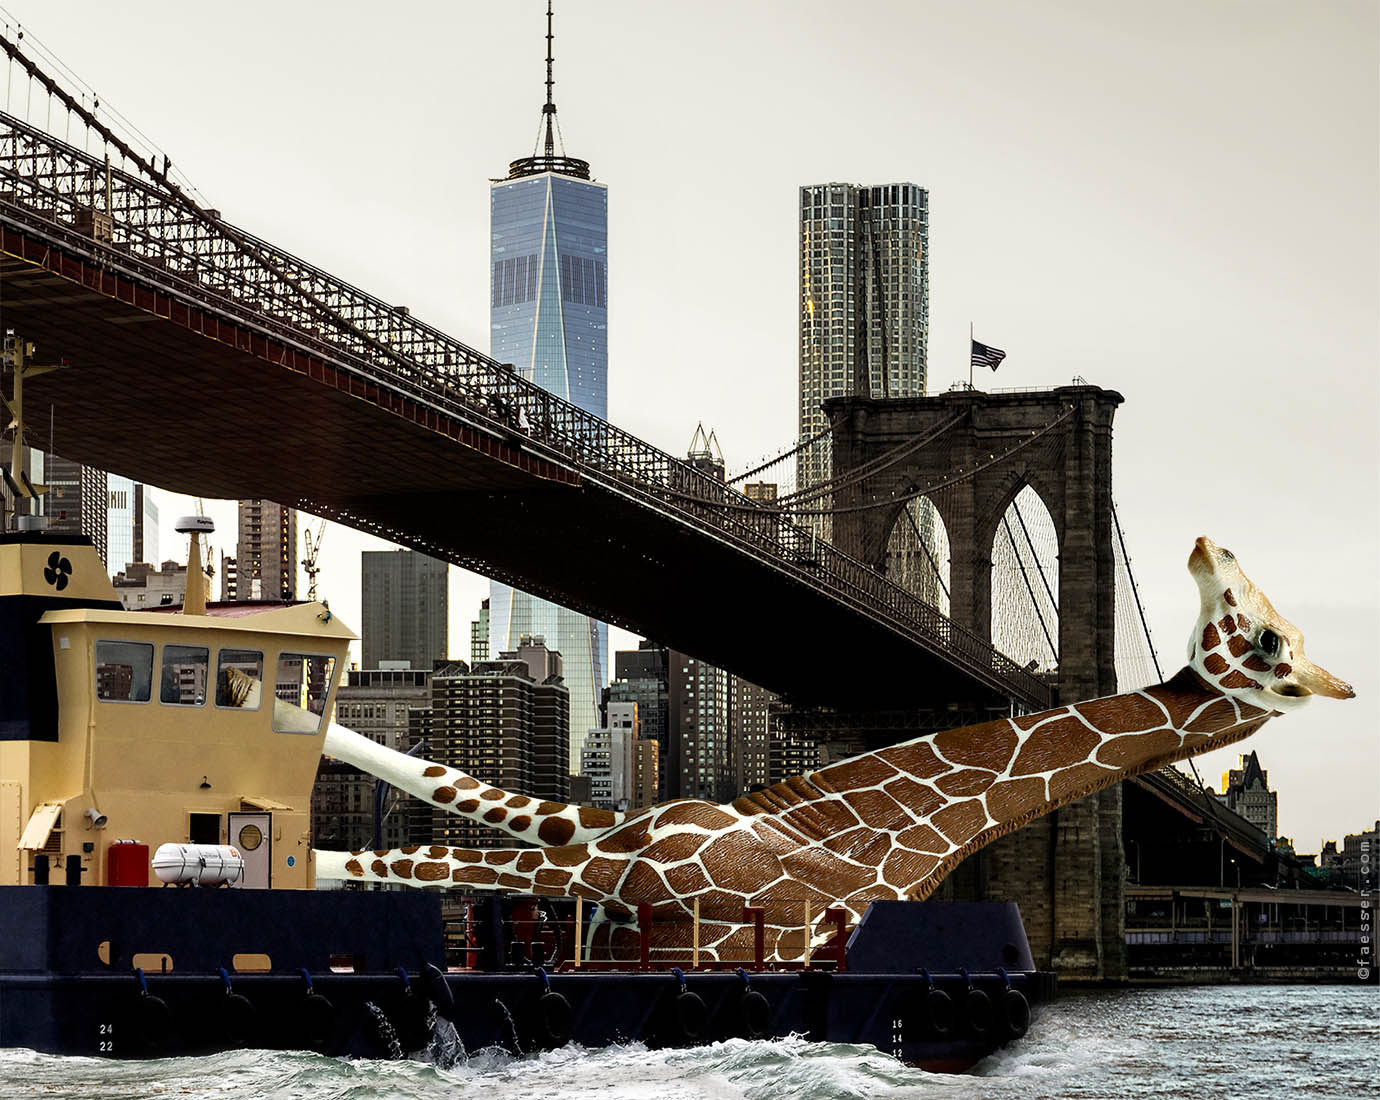 Public giraffe sculpture shipping on the East River in NYC; artist Roland Faesser, sculptor and painter 2018